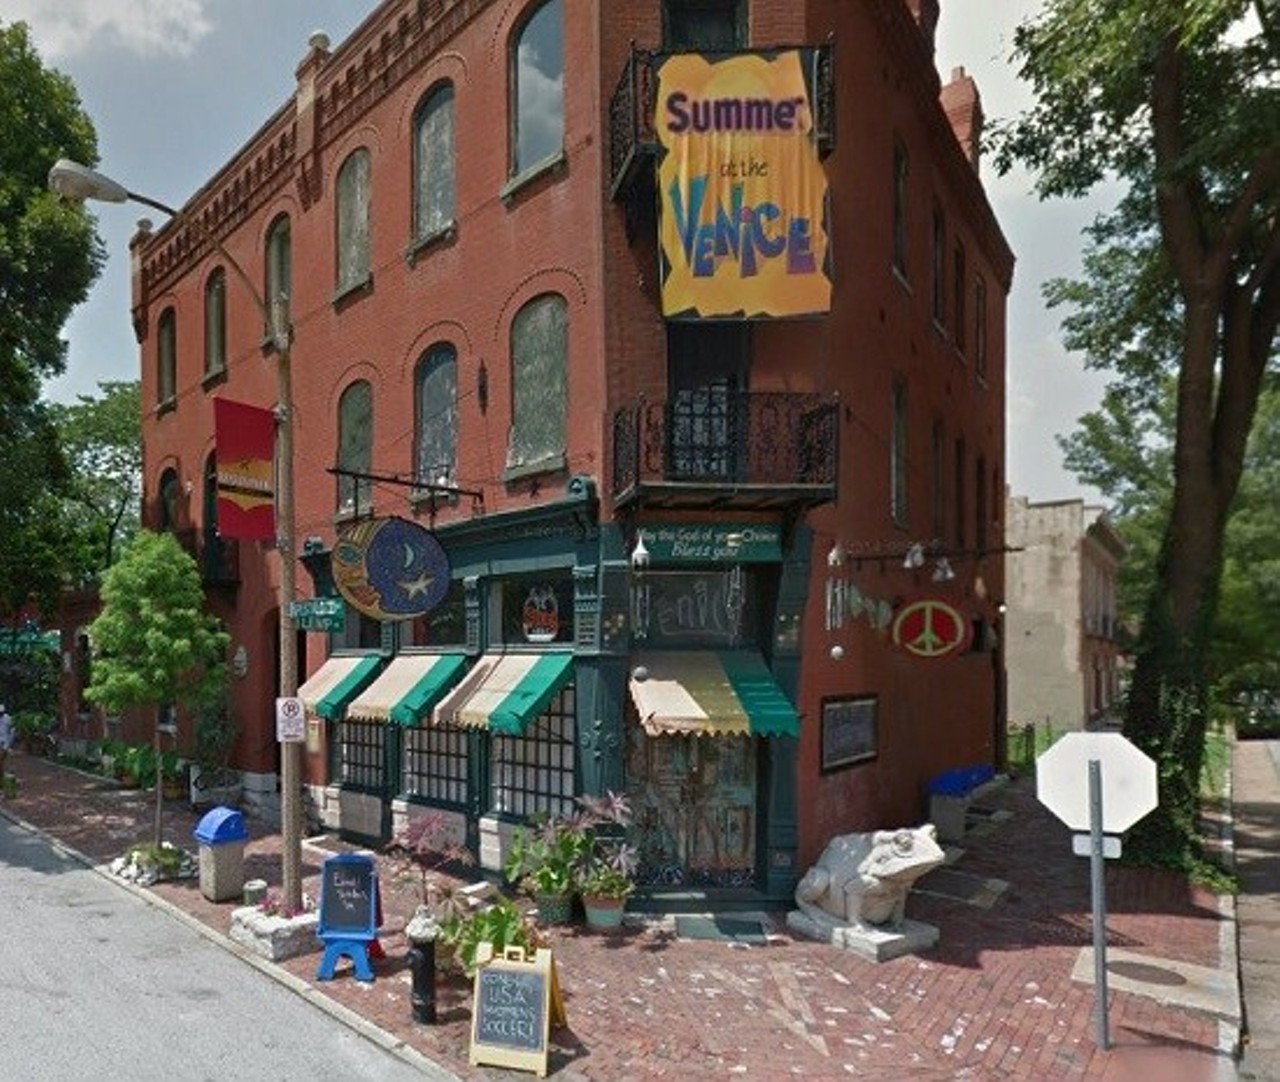 Venice Caf&eacute;
(1903 Pestalozzi Street, 314-772-5994) 
Warning commenters with a place on their "typical responses" bingo card, the person who runs Venice Cafe's Instagram account told guests proof of vaccination will be required at the caf&eacute; now.
Photo credit: Google Street View